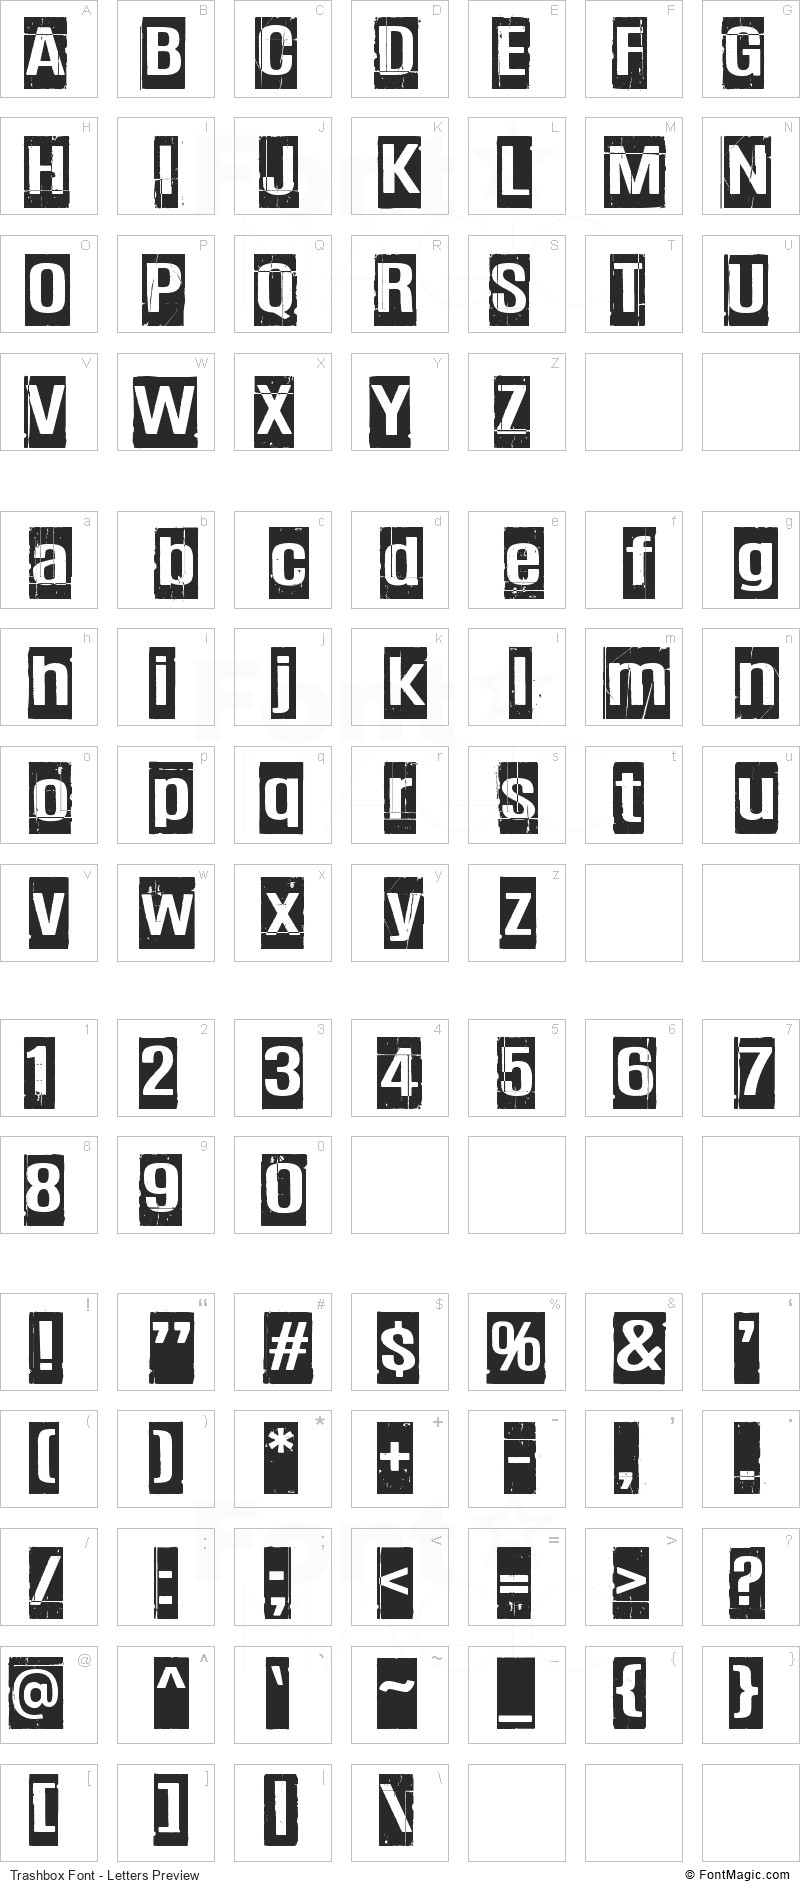 Trashbox Font - All Latters Preview Chart